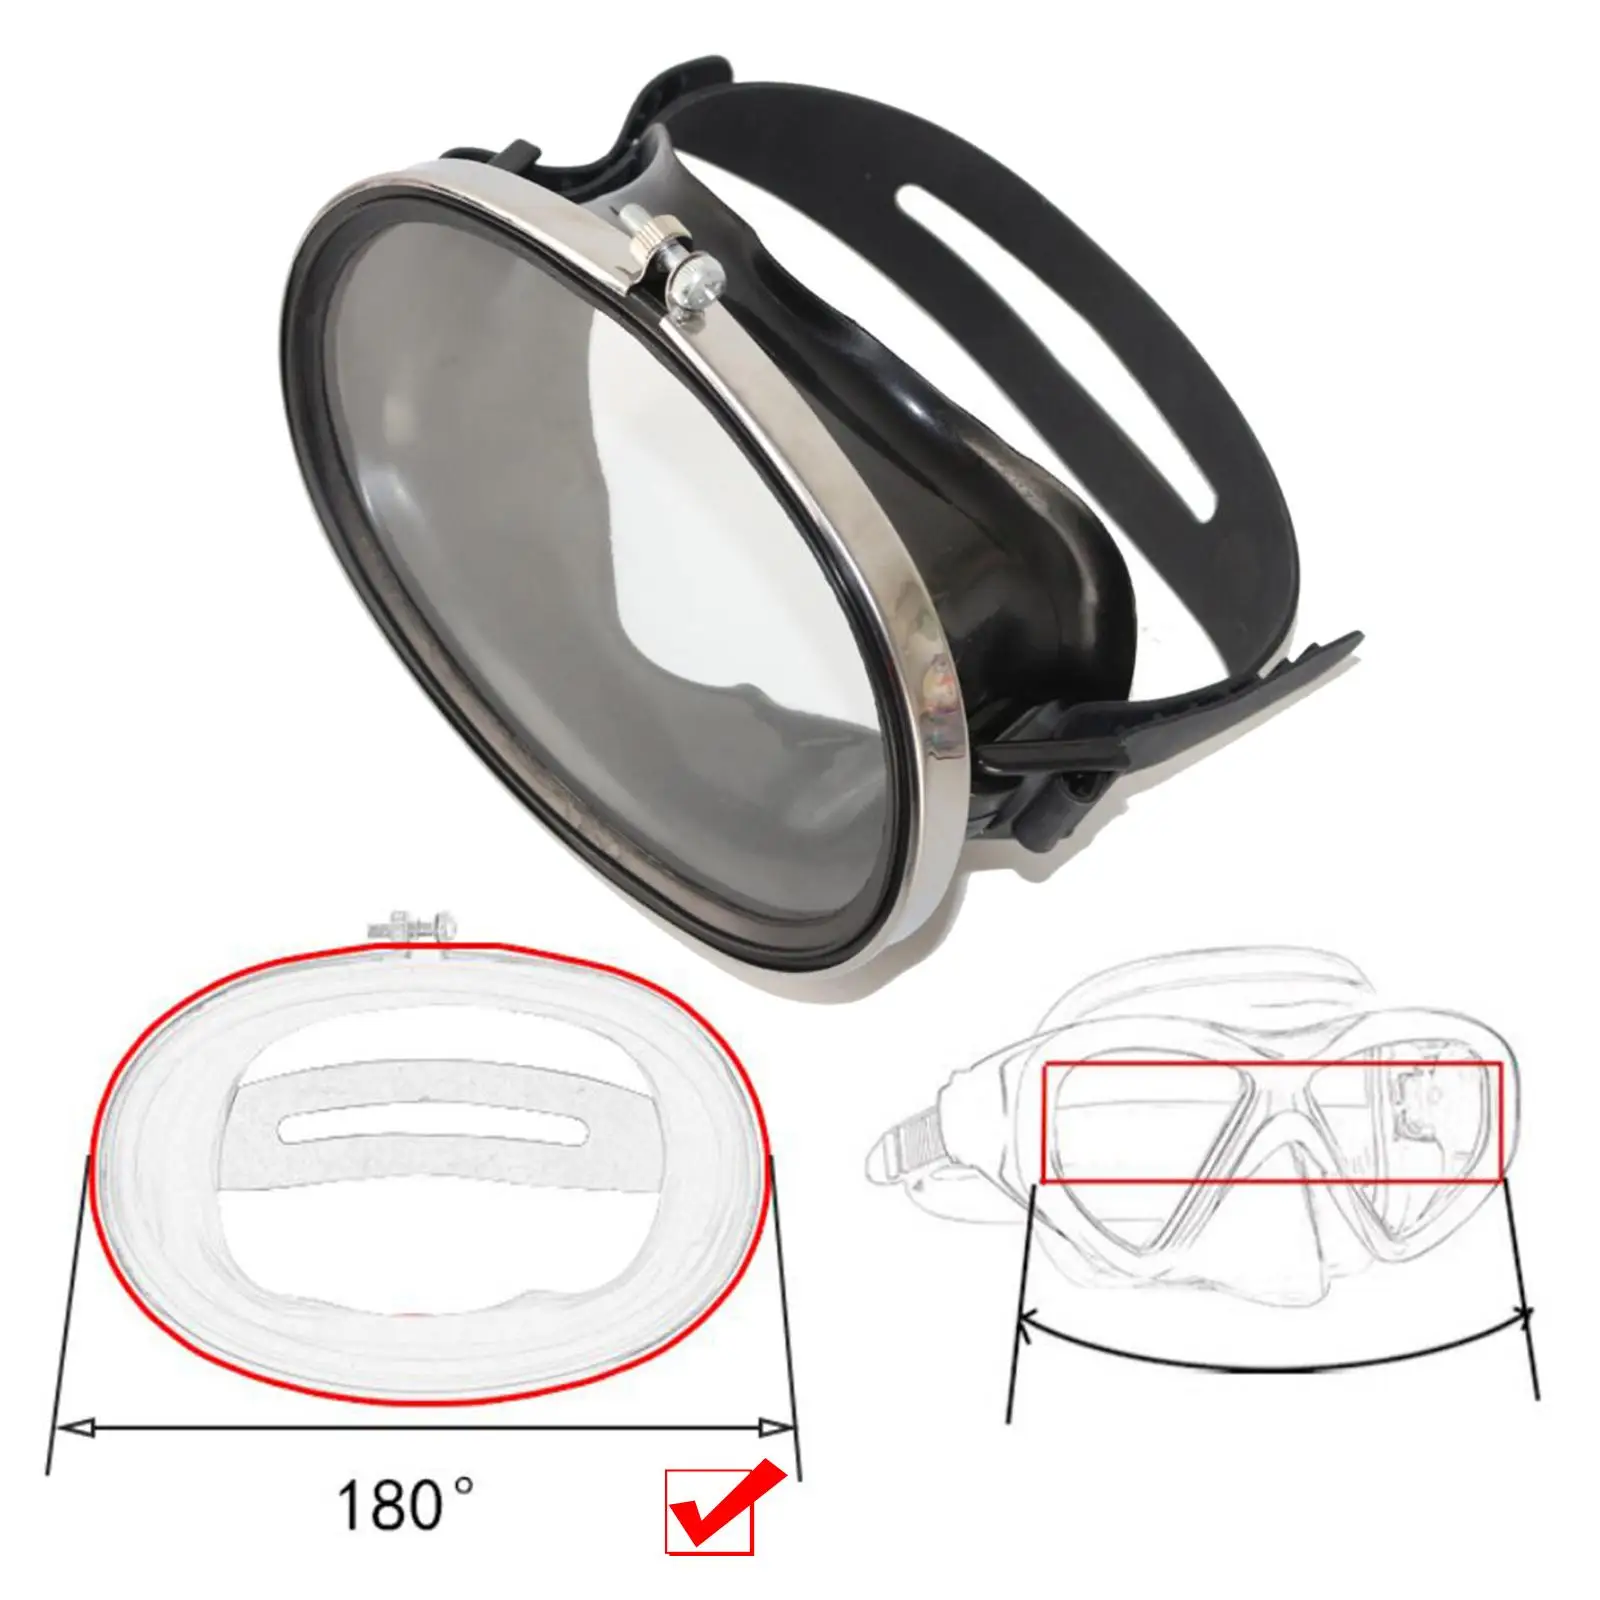 Retro Adult Oval Diving Mask Tempered Glass Foresight Swimming Goggles Explosion-proof Toughened Glasses For Scuba Diving